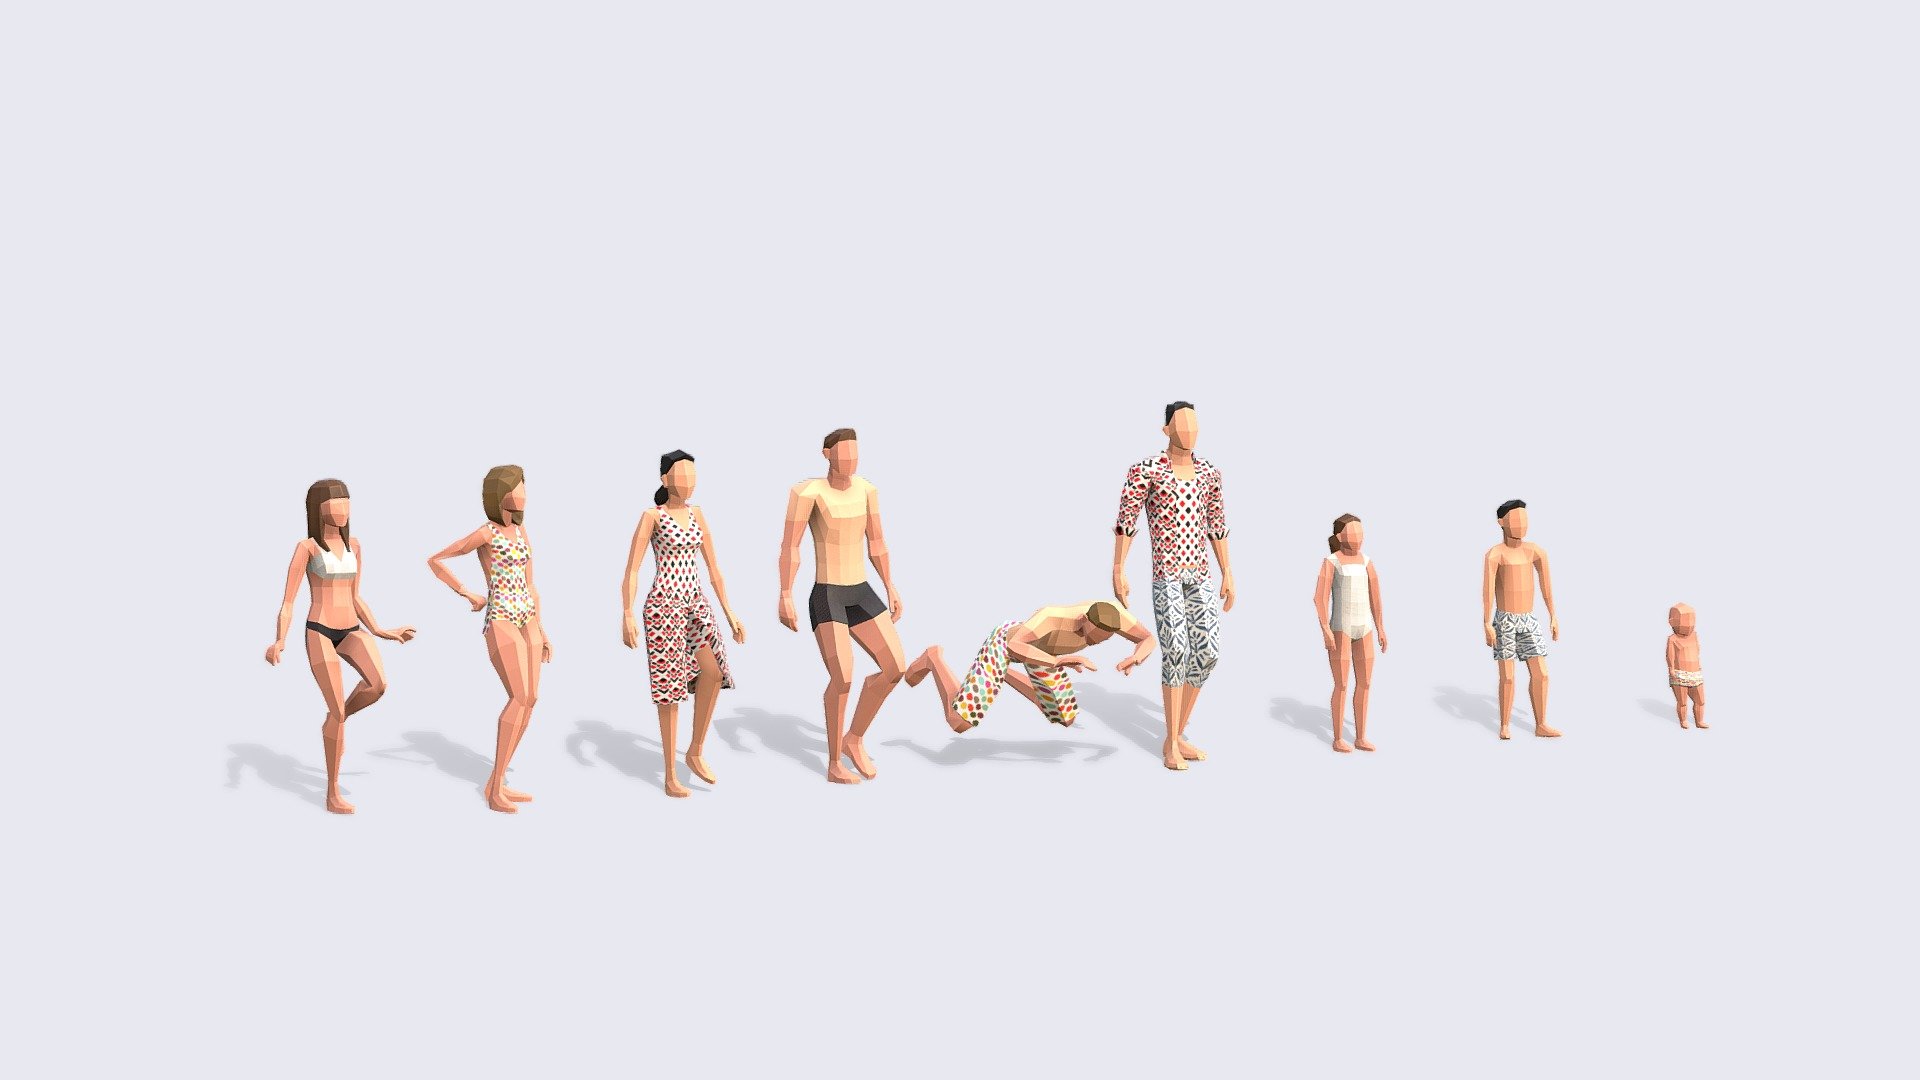 SUMMER LOW POLY PEOPLE
A super versatile pack of Low Poly People where all models can walk, chat and interact. Plus all models can use the same or vary the 6 different textures.

INCLUDES:




Independent Rest Pose fin FBX, perfect for Animating with mixamo or your chosen platform

Independent Animated FBX file that includes all 9 looping animations -100 frames

Full Pack Blender Native file with all characters together.

Textures created for the pack.


Give some unique style to your crowds with our collection of low poly people.
*3RD GENERATION of Animated Low-Poly People and it will be included in The Compilation - Summer People - Animated & Rigged - Buy Royalty Free 3D model by Studio Ochi (@studioochi) 3d model